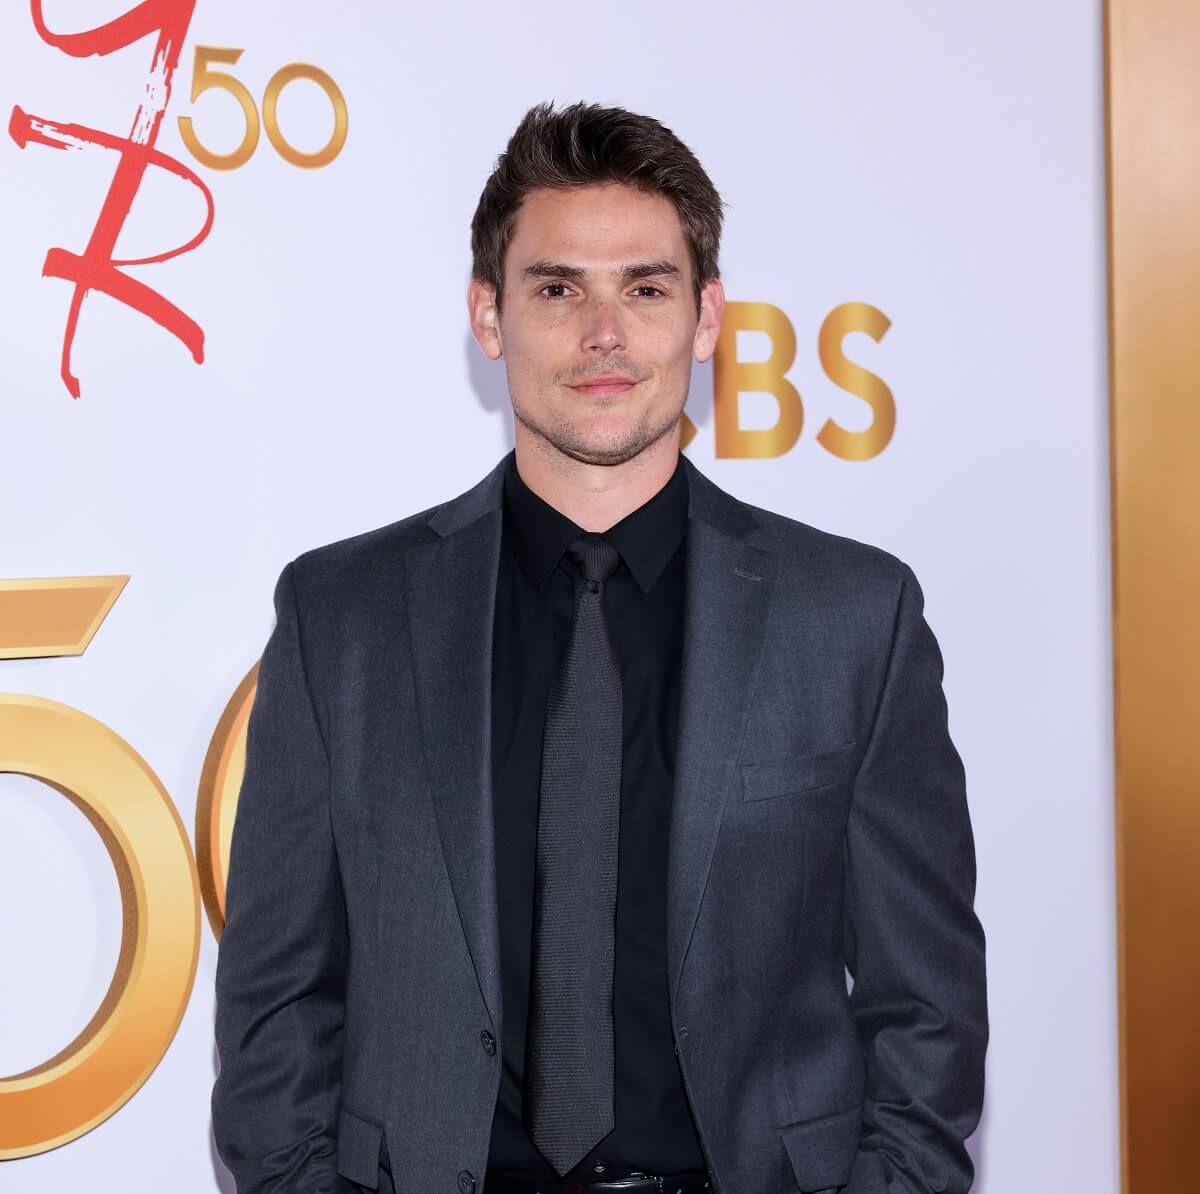 'The Young and the Restless' star Mark Grossman in a grey suit and black shirt; posing on the red carpet of the show's 50th anniversary celebration.